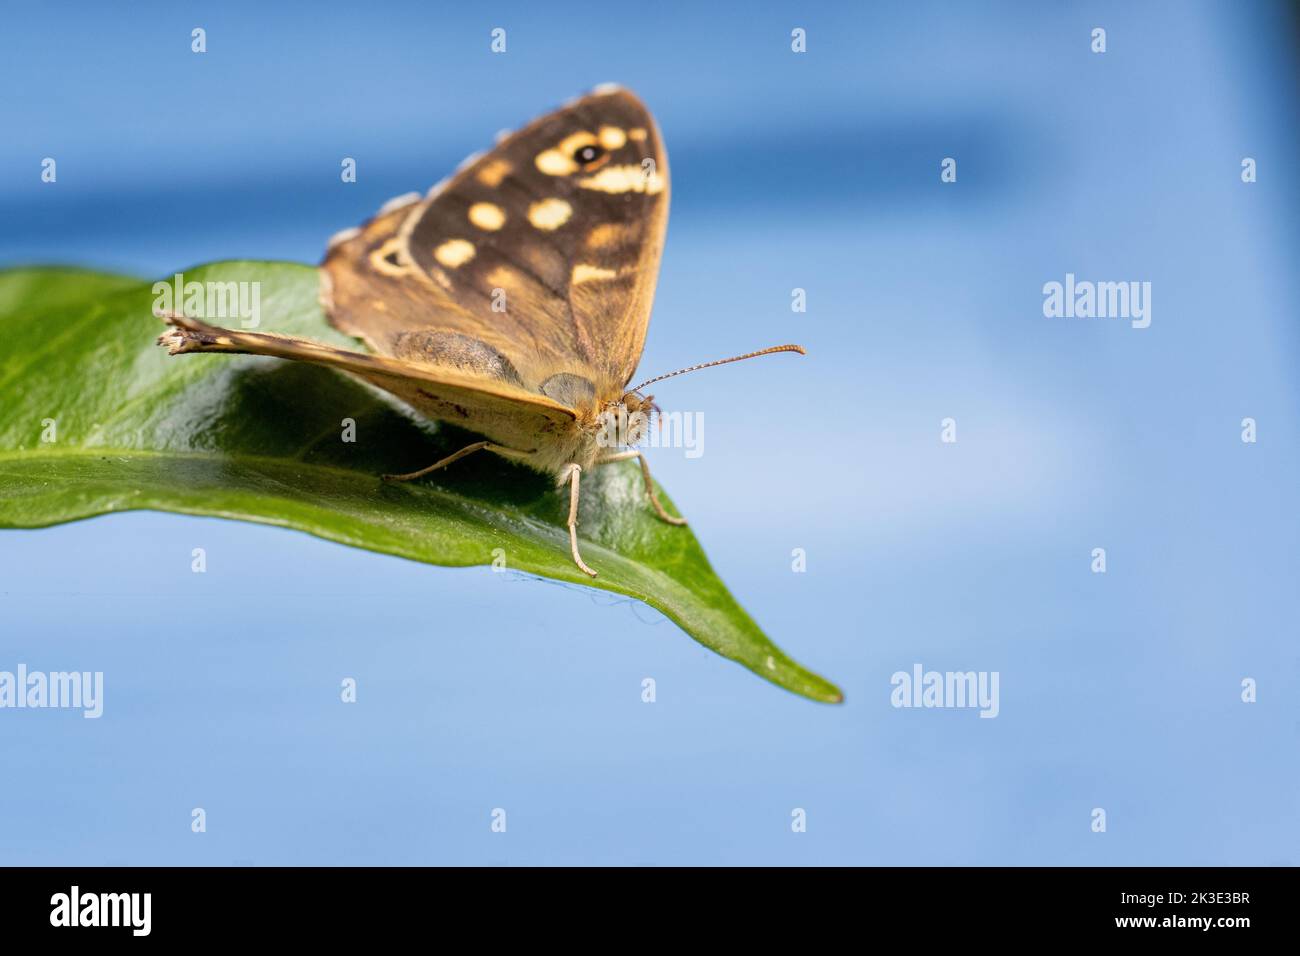 Side view of a speckled wood butterfly (Pararge aegeria) isolated against a blue shed in a garden, UK Stock Photo